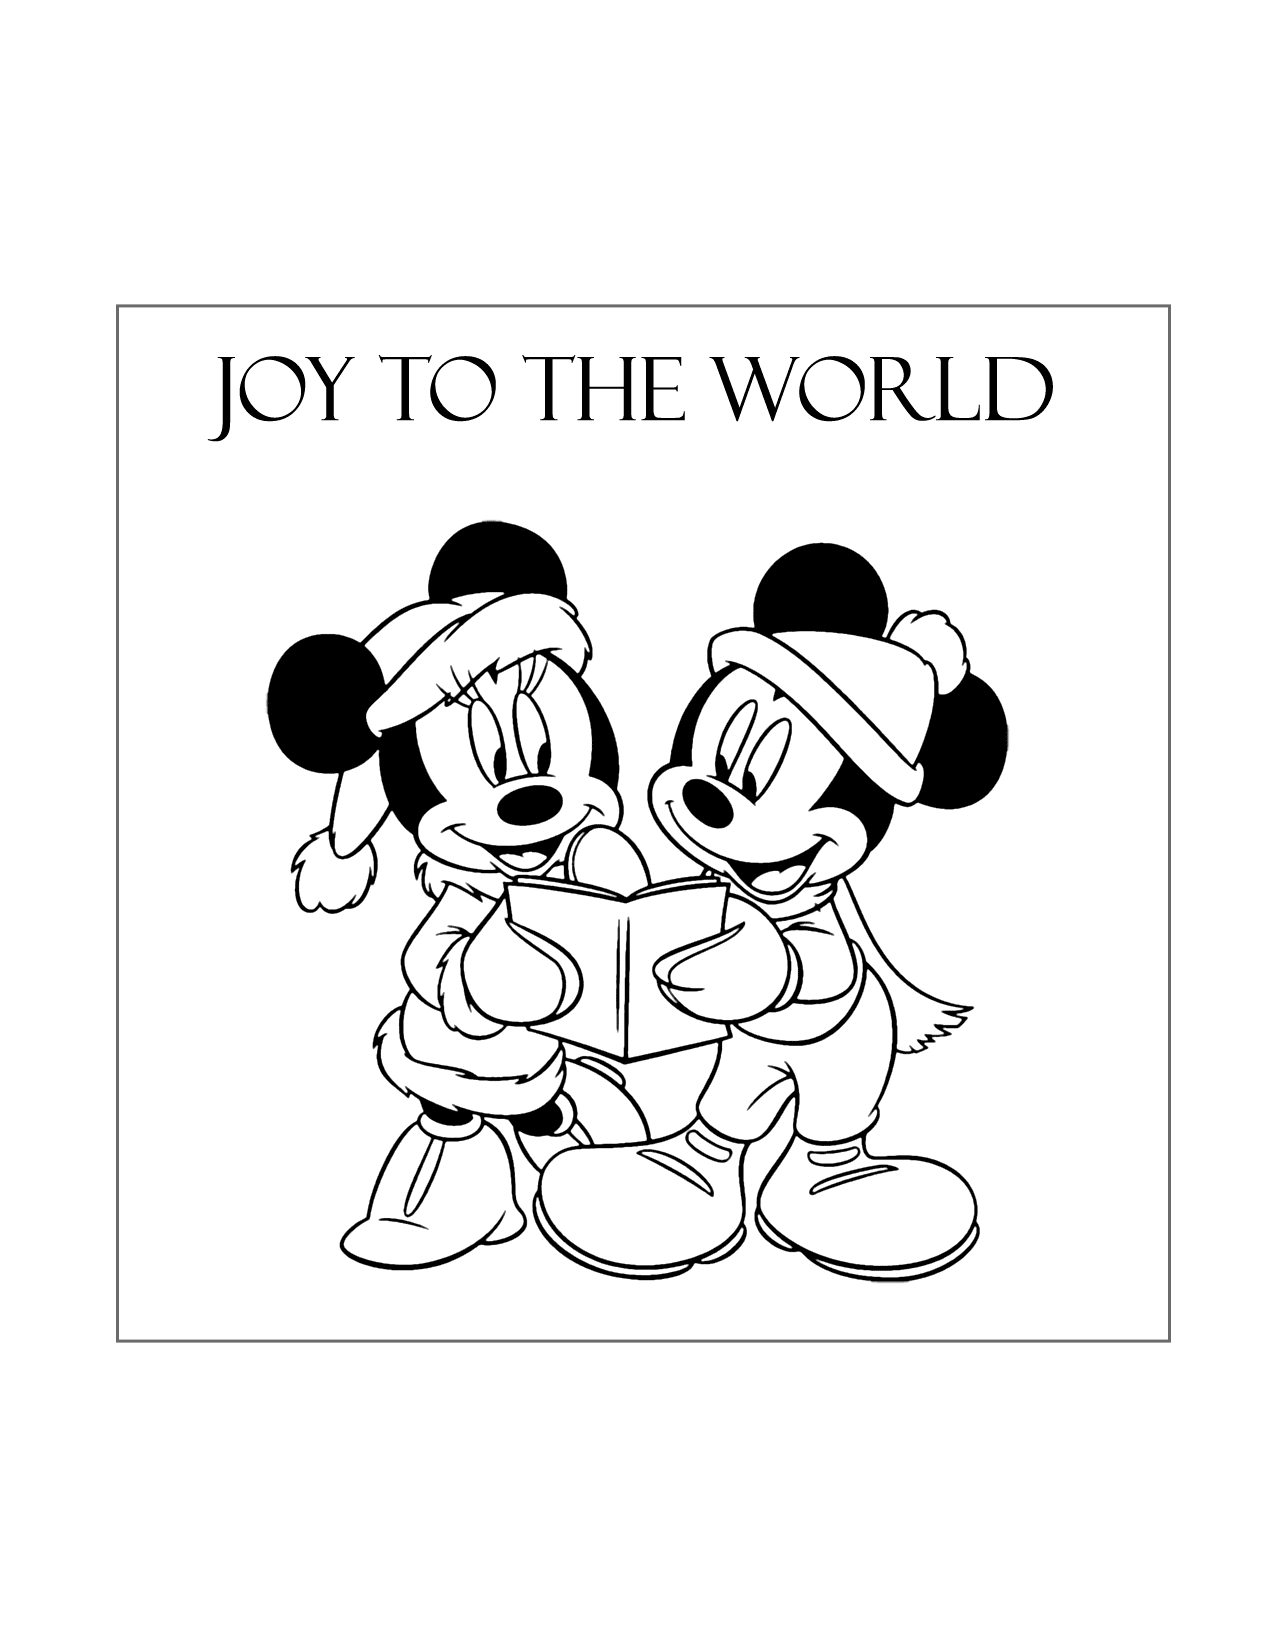 Mickey And Minnie Singing Christmas Carols Coloring Page